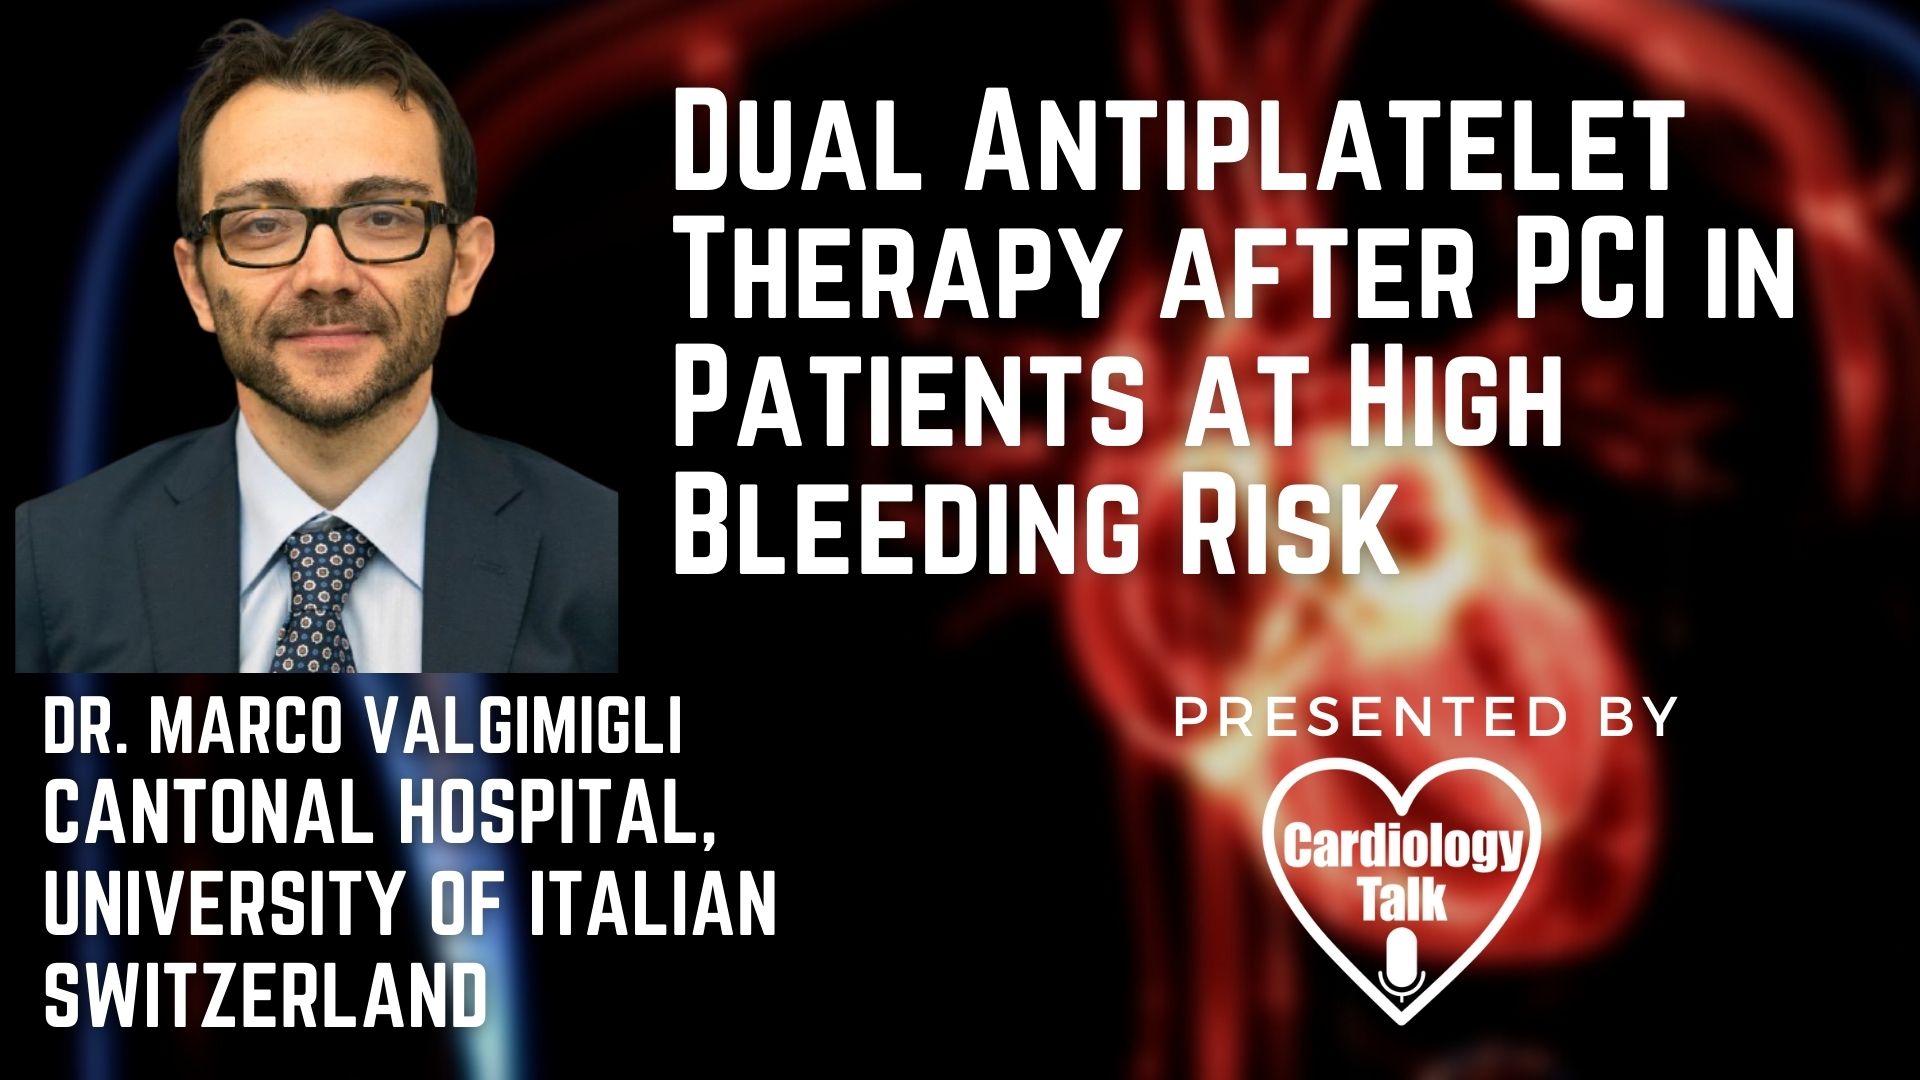 Marco Valgimigli, MD- @vlgmrc #CantonalHospital #UniversityofItalianSwitzerland #CoronaryArteryDisease #Cardiology #Research  -Dual Antiplatelet Therapy after PCI in Patients at High Blee...